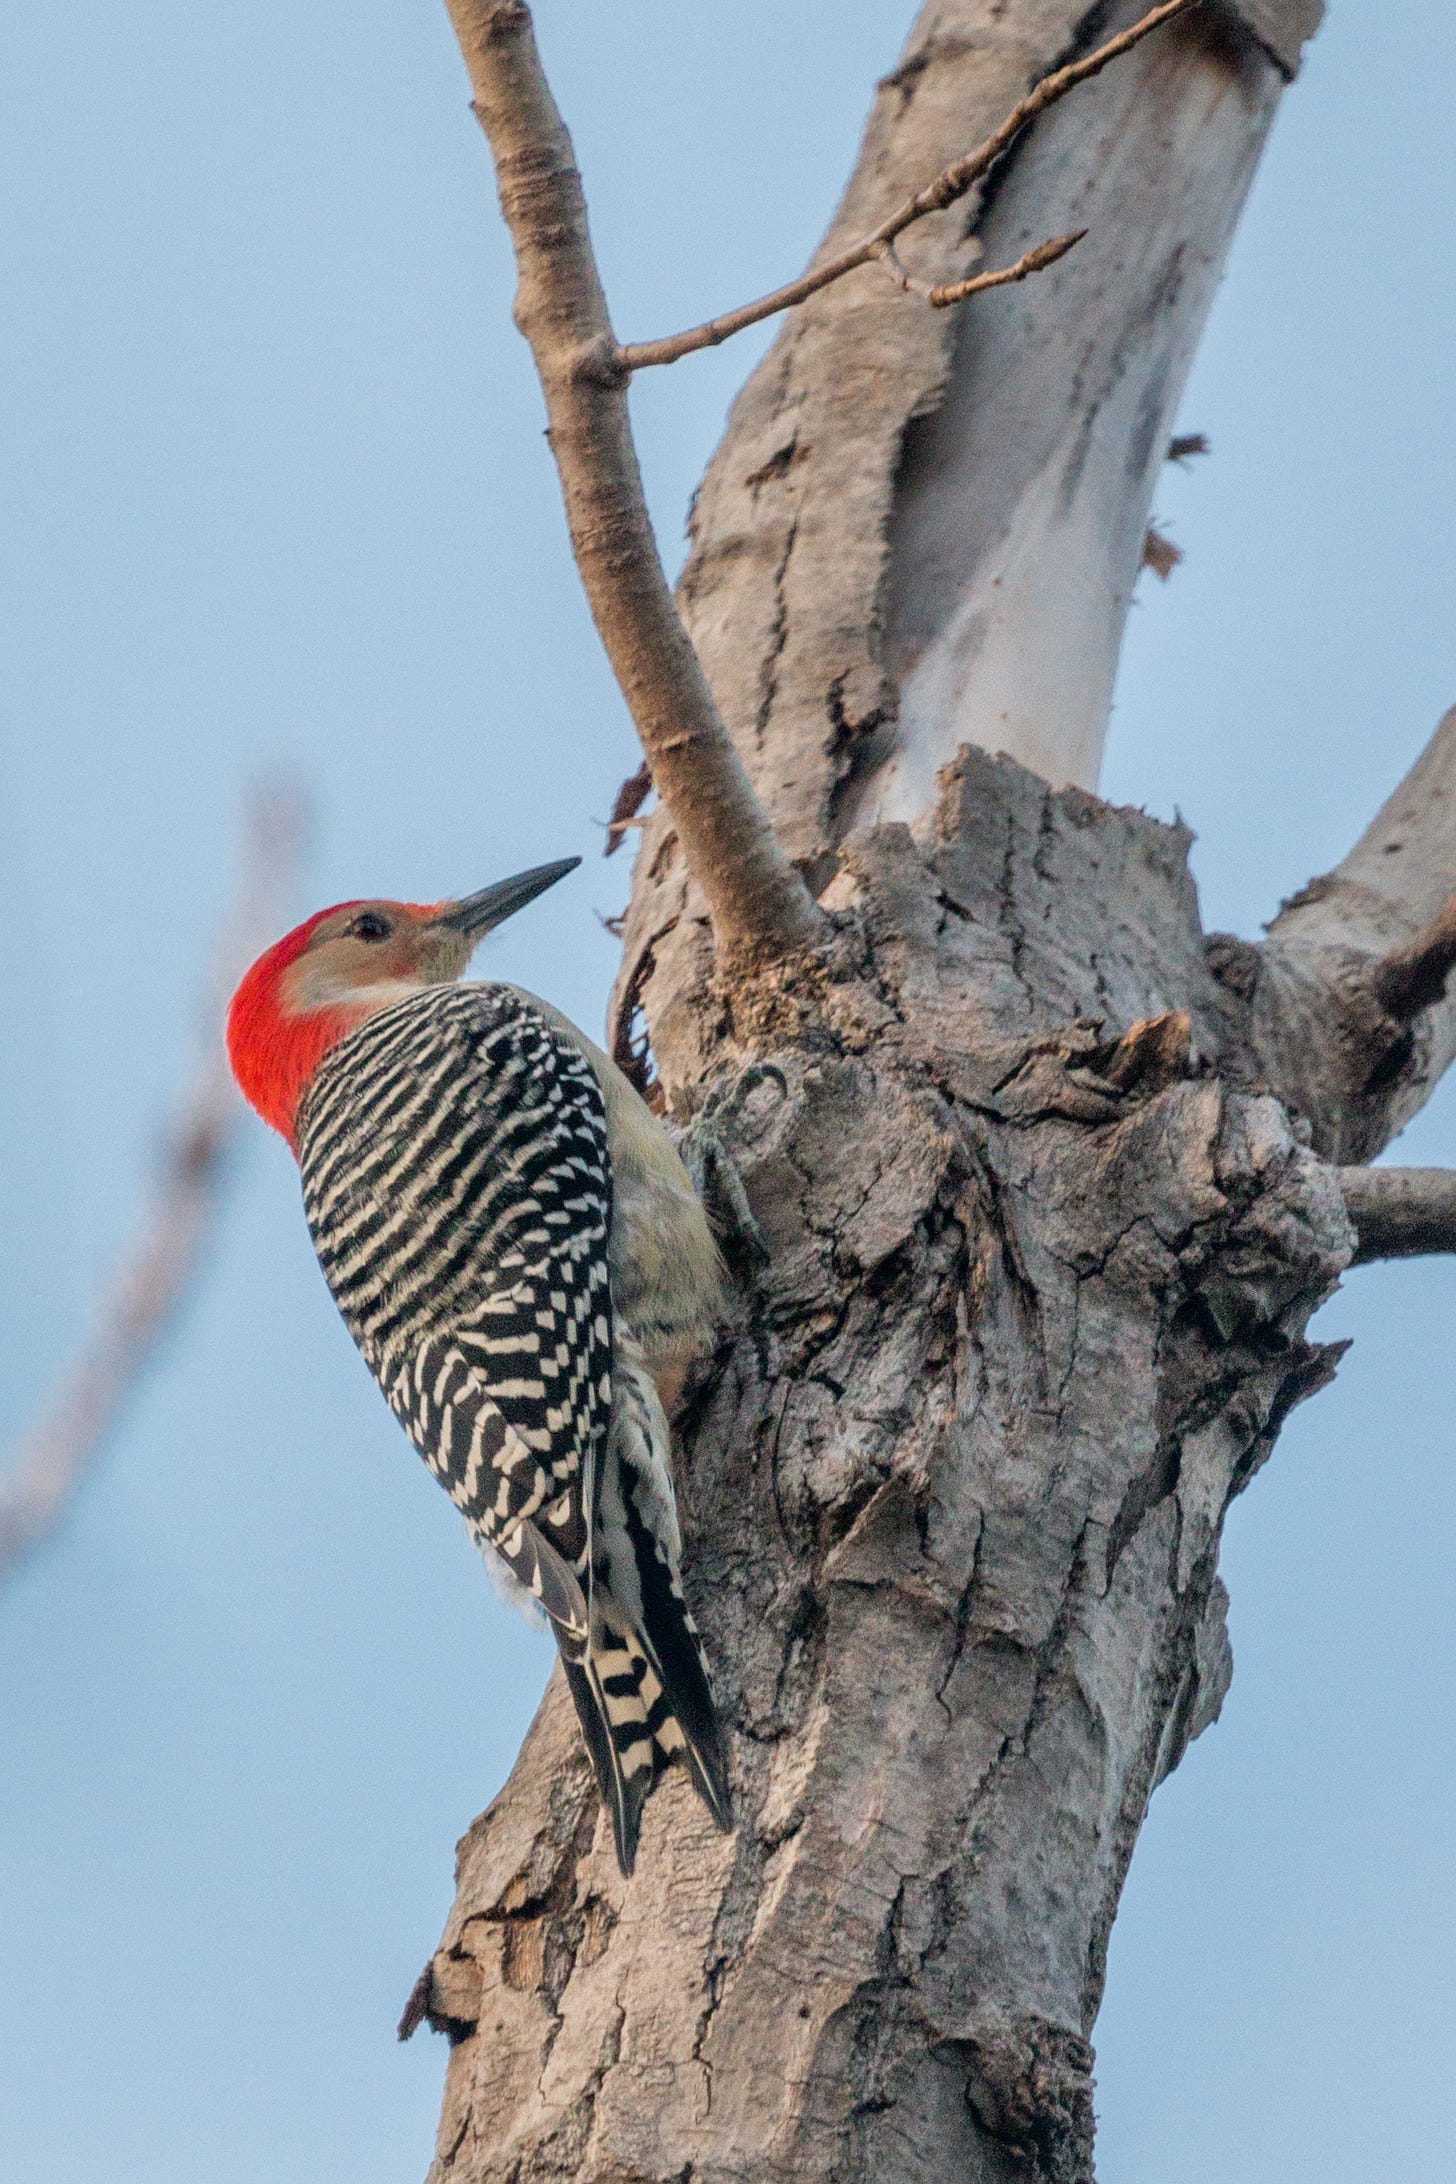 A red-bellied woodpecker, a medium-sized bird with a bright red head, long beak, and black and white striped feathers, perches on a bare tree.